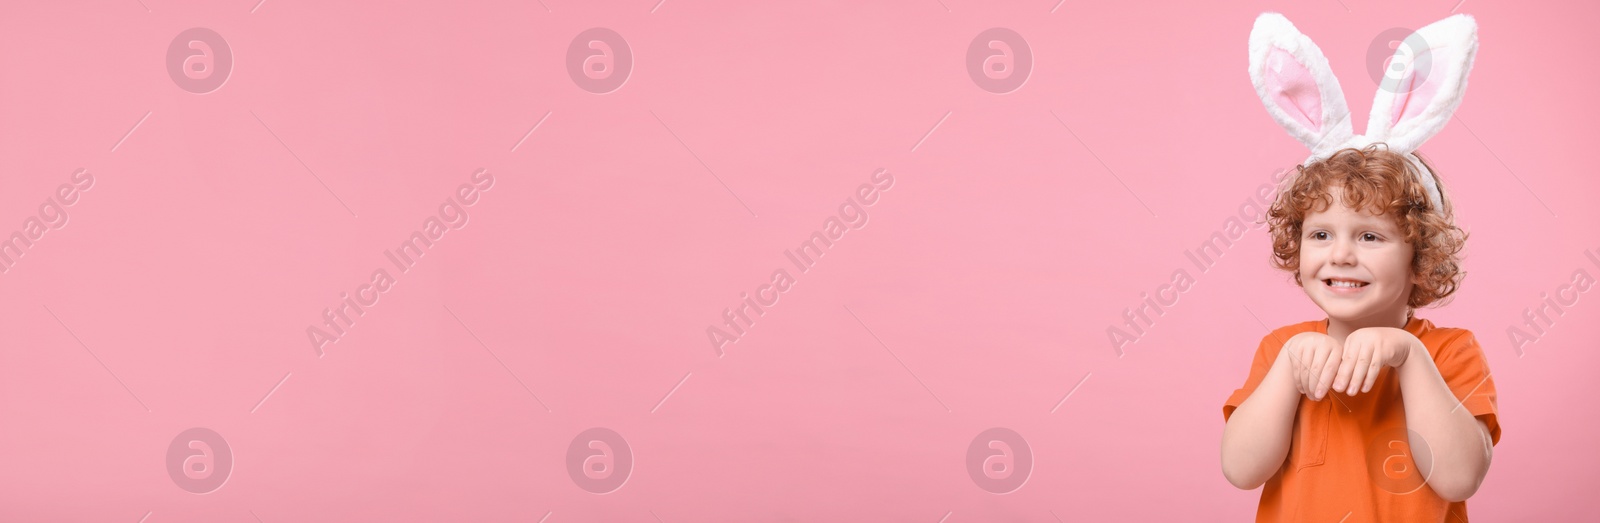 Image of Happy little boy with bunny ears headband on pink background, space for text. Easter celebration. Banner design